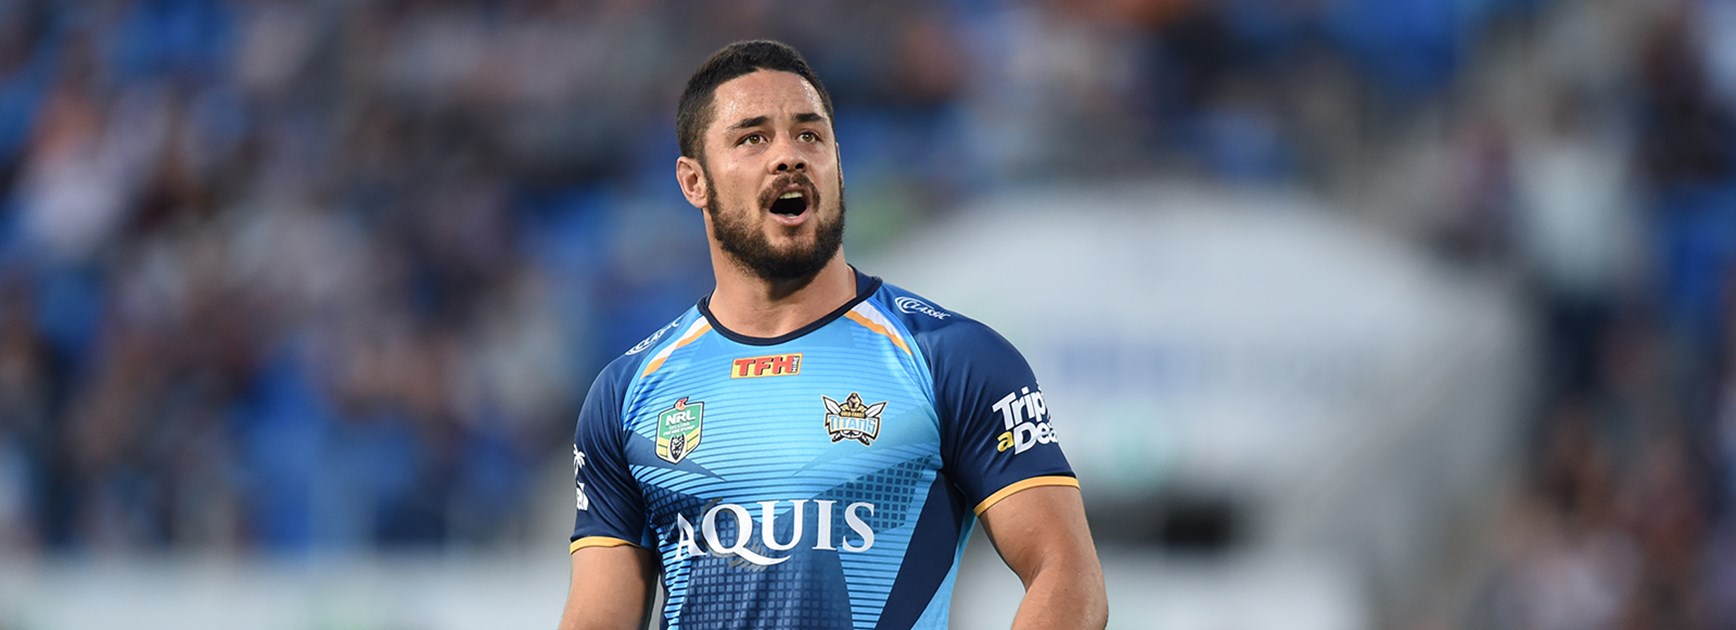 Jarryd Hayne looks on as the Titans season was ended by the Wests Tigers.